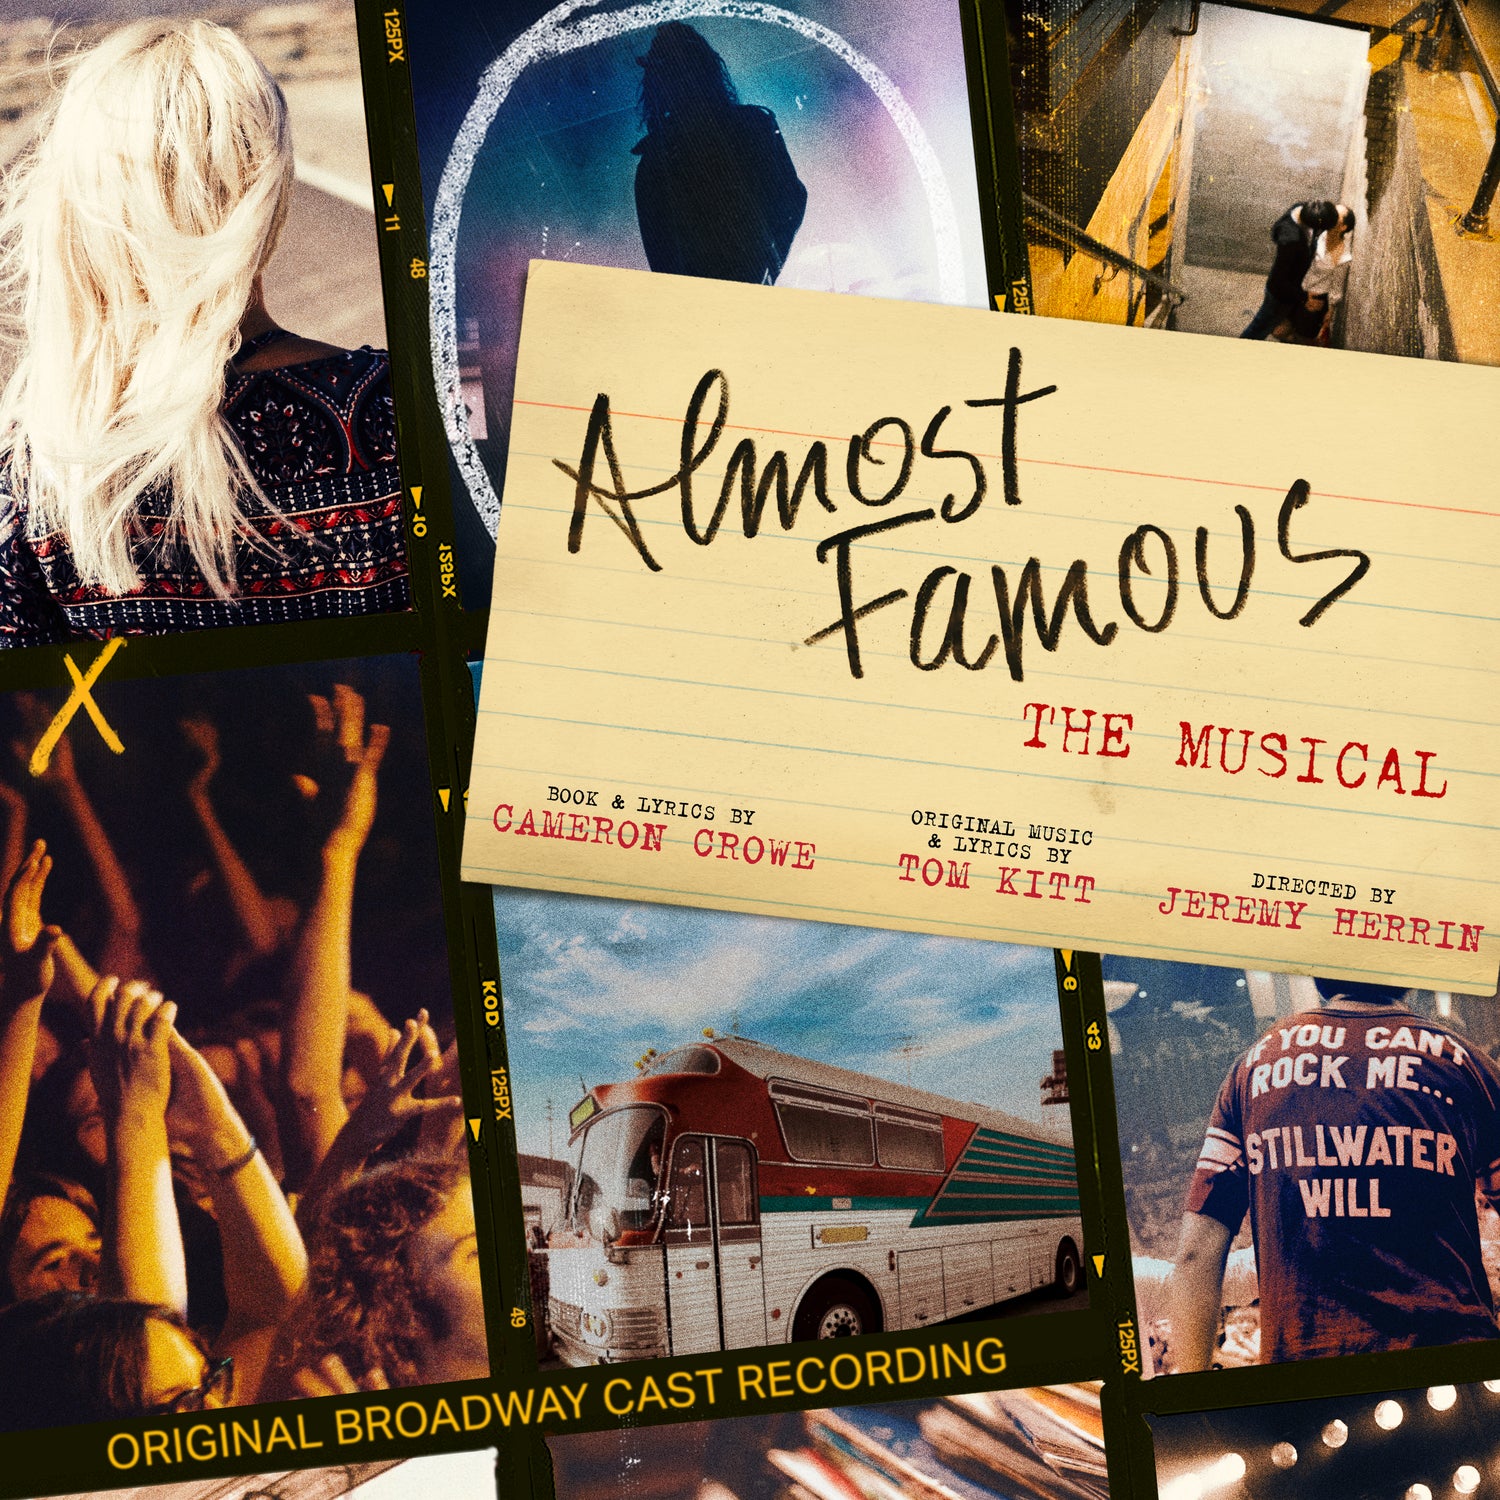 Original Broadway Cast of Almost Famous - The Musical Almost Famous - The Musical (Original Broadway Cast Recording) CD